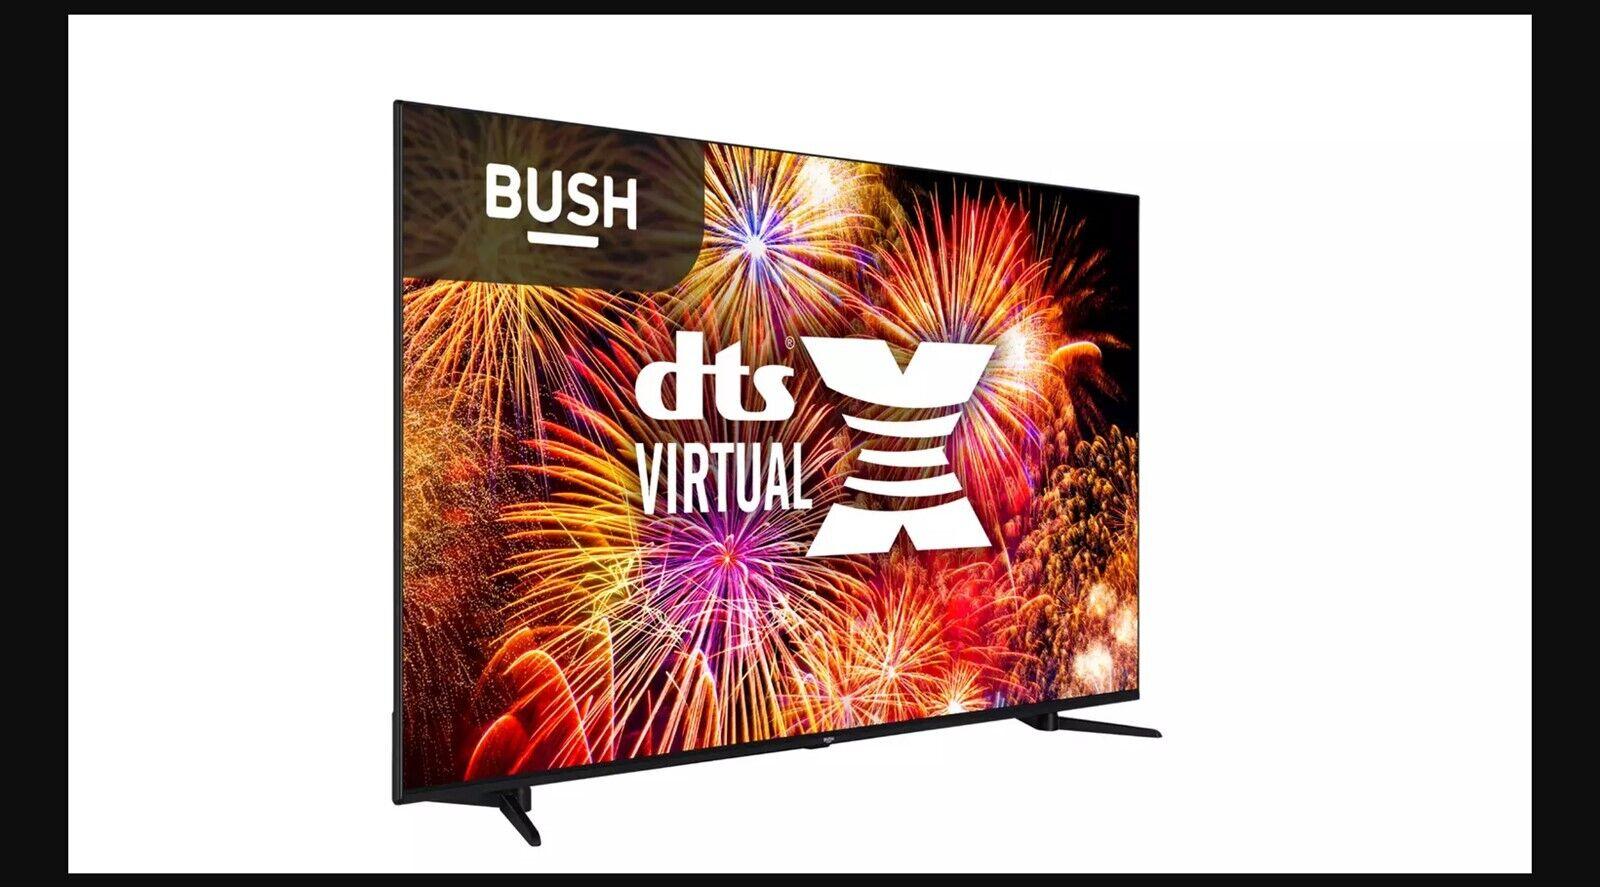 Bush 55 Inch QLED55UHDS Smart 4K UHD HDR QLED TV COLLECTION ONLY NO STAND U - Smart Clear Vision